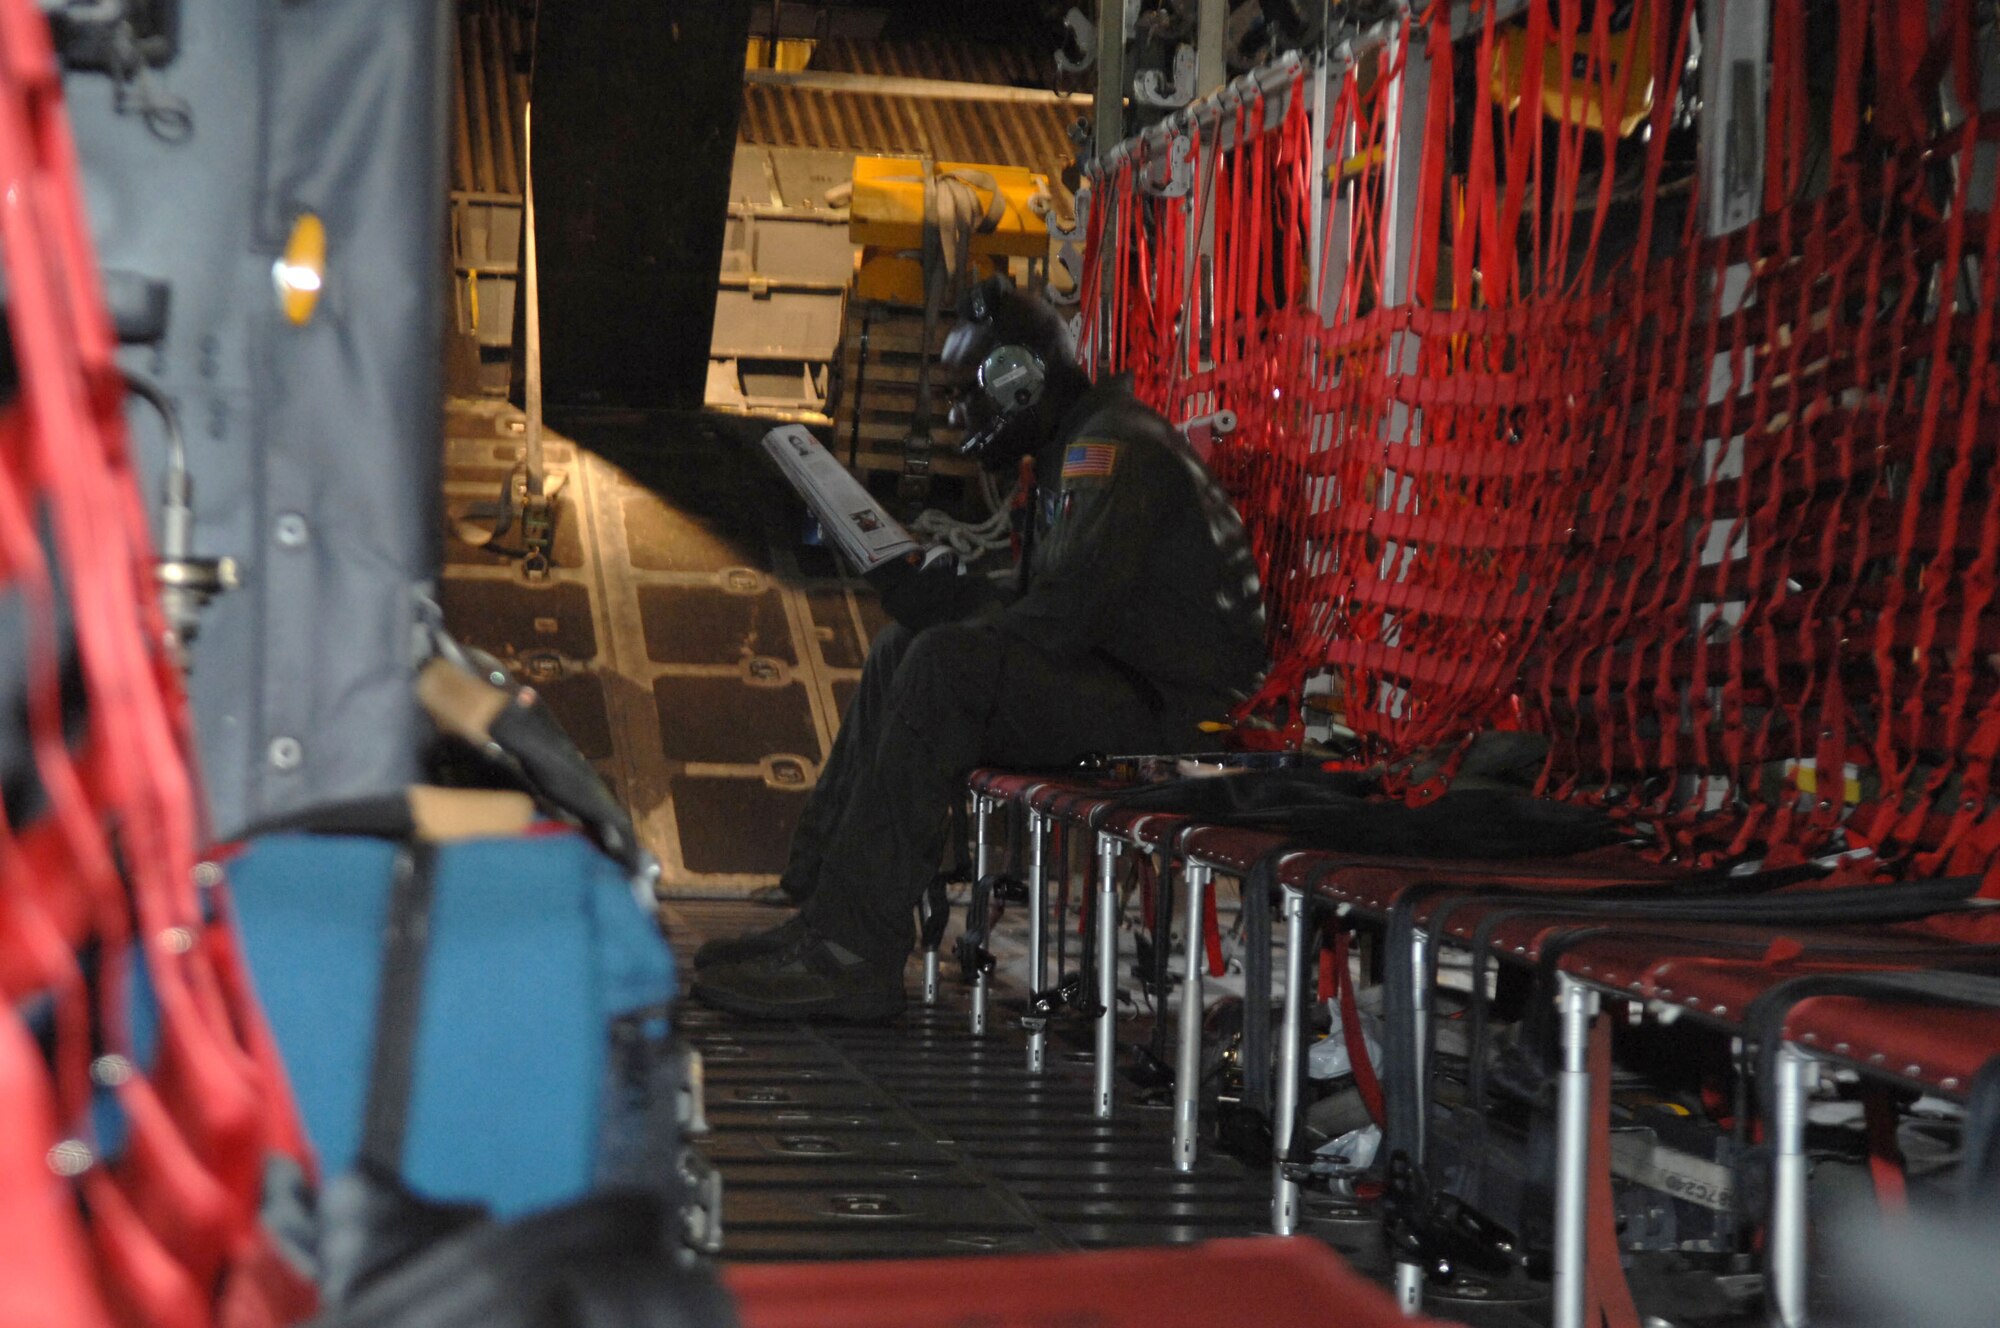 United States Air Force Staff Sgt. Corey Long, 37th Airlift Squadron loadmaster, relaxes before landing in Grafenwoehr, Germany, April 22, 2009. This is the final large airdrop with the 173rd Airborne Brigade Combat Team that the C-130E Hercules will make. The C-130J model will be used for jumps in the future. (U.S. Air Force photo by Tech. Sgt. Michael Voss)